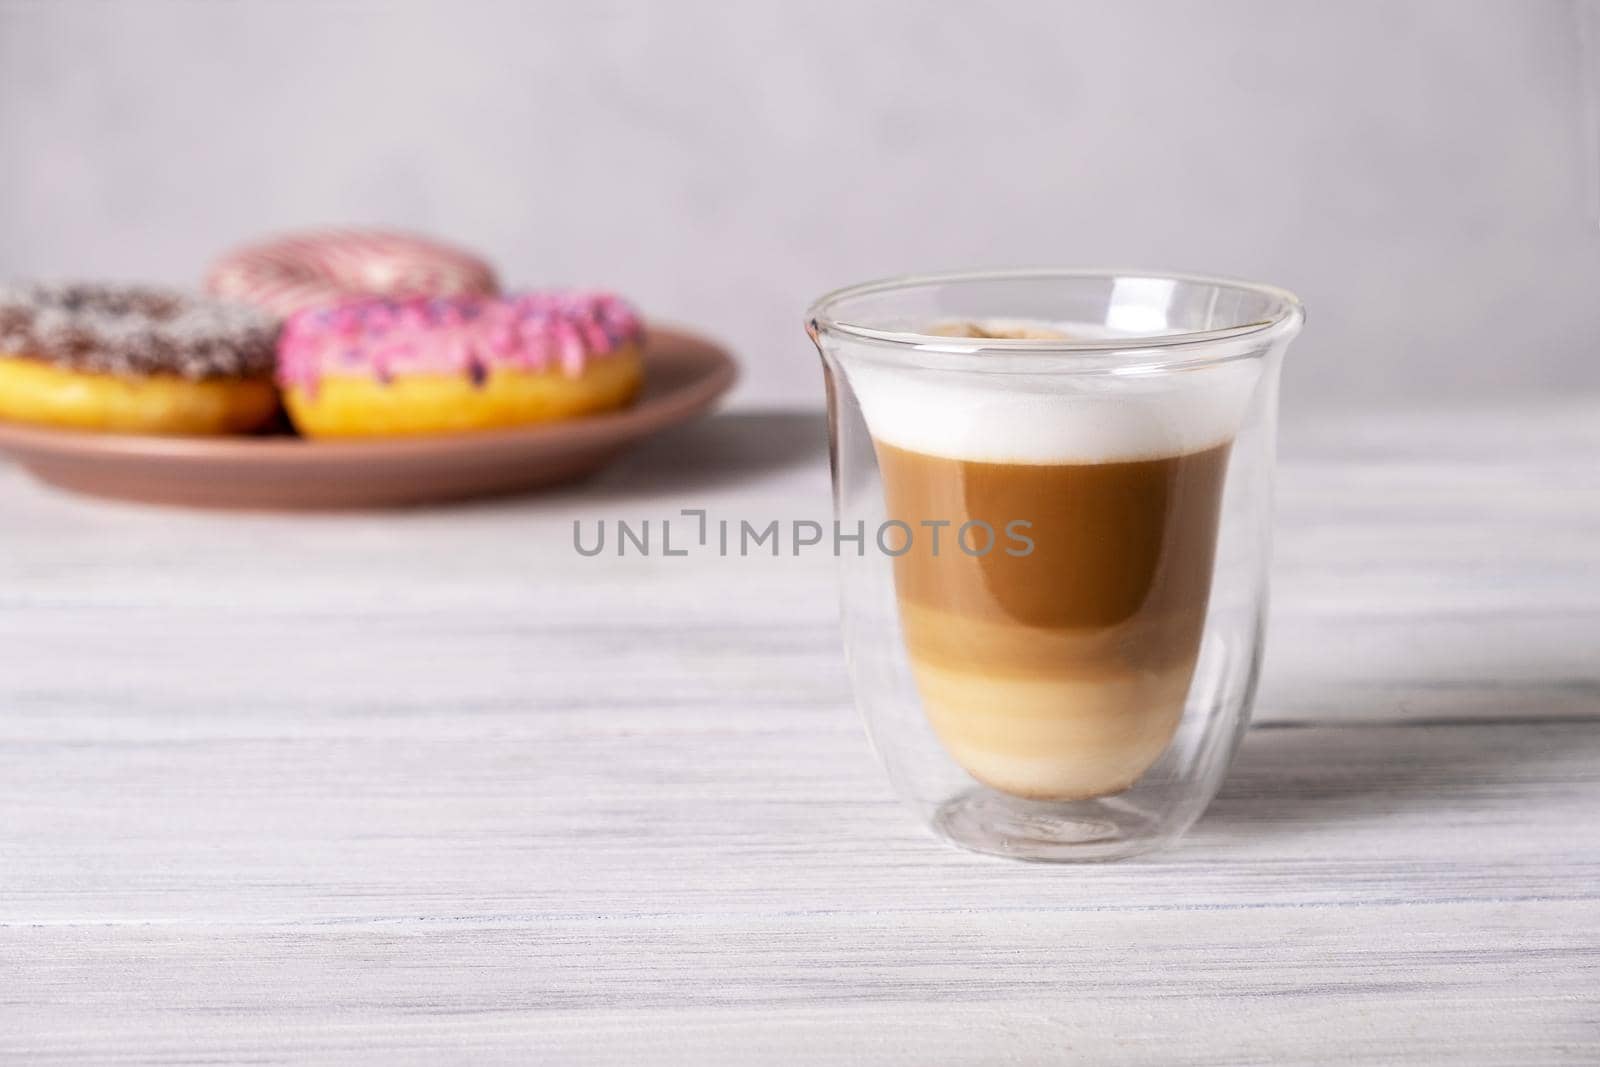 Glazed decorated donuts on plates and coffee latte or cappuccino with milk foam in a heat-resistant glass cup. Selective focus.